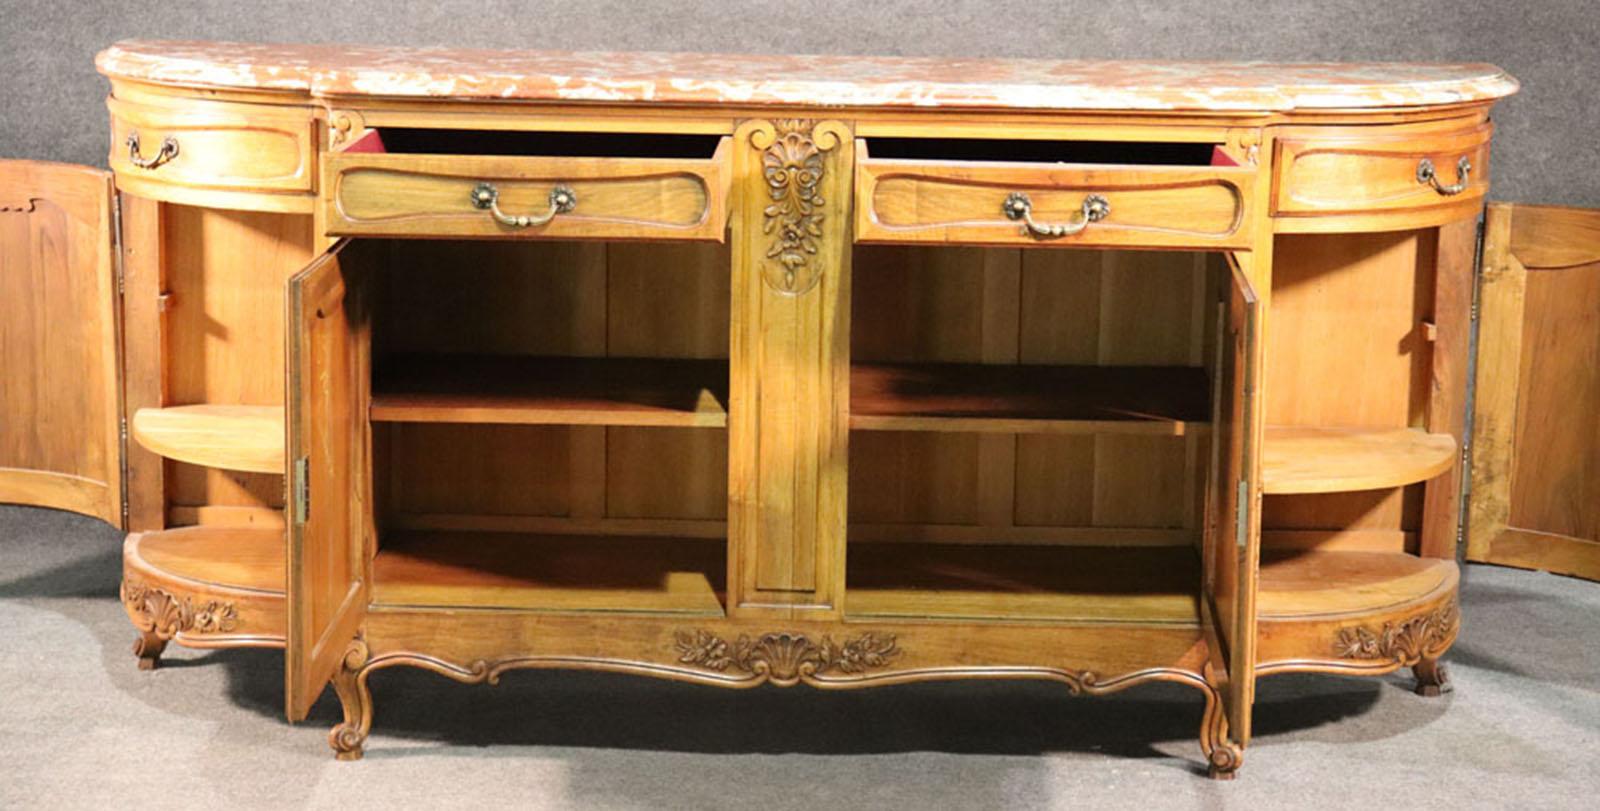 This monumental sideboard features some of the finest carving possible in this style and a gorgeous undamaged slab of marble on top. The marble has hues of coral and whites and is a beautiful contrast to the fruitwood hued walnut case. The piece